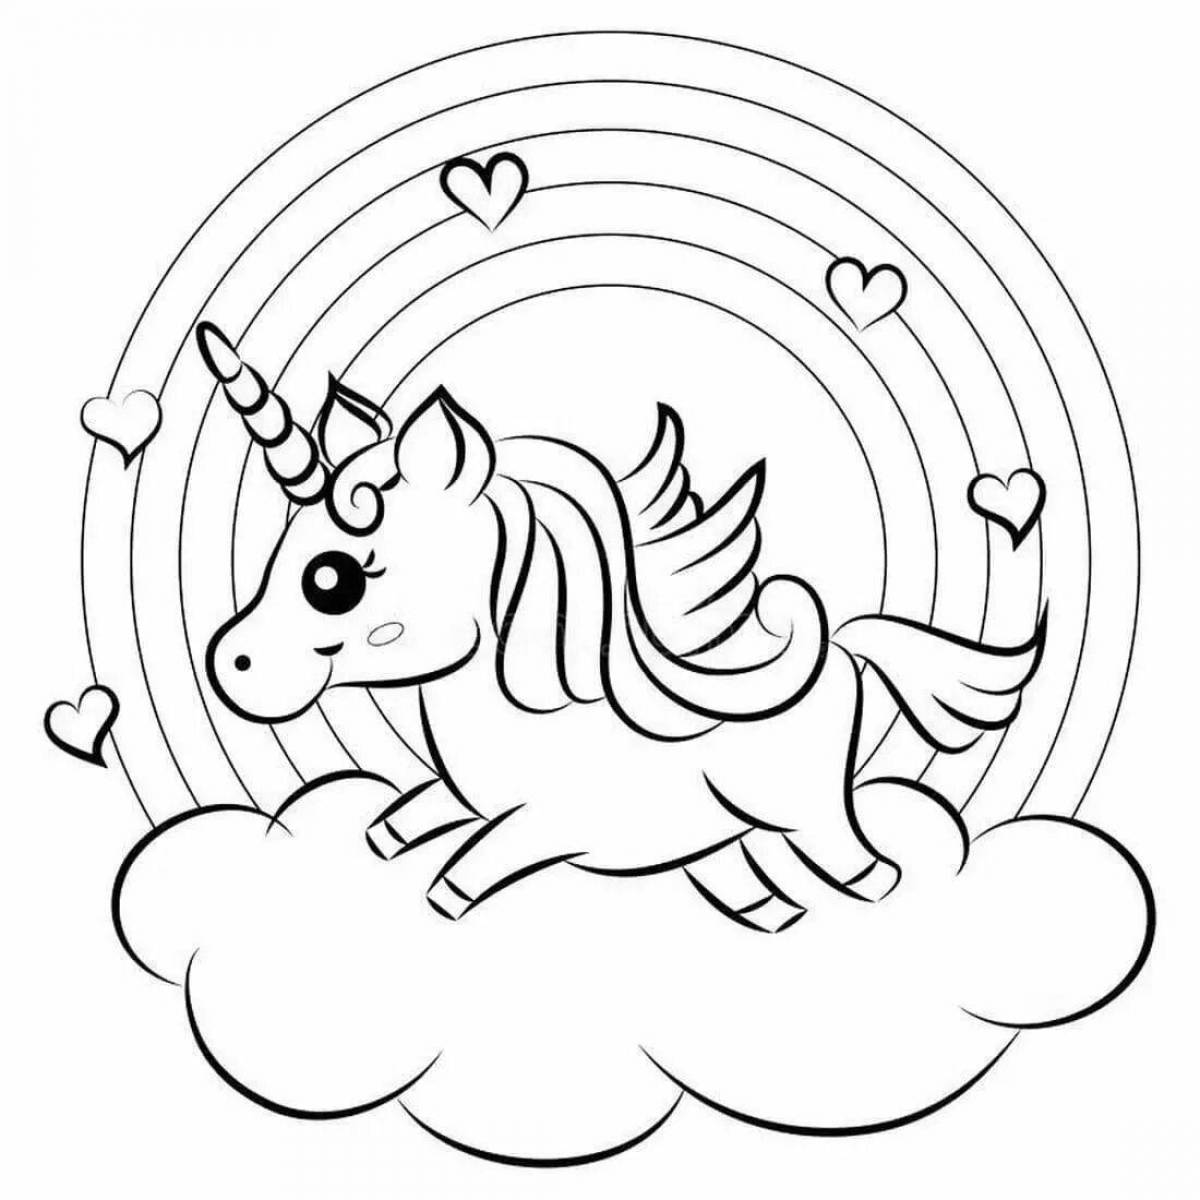 Adorable unicorn coloring book for kids 5-6 years old